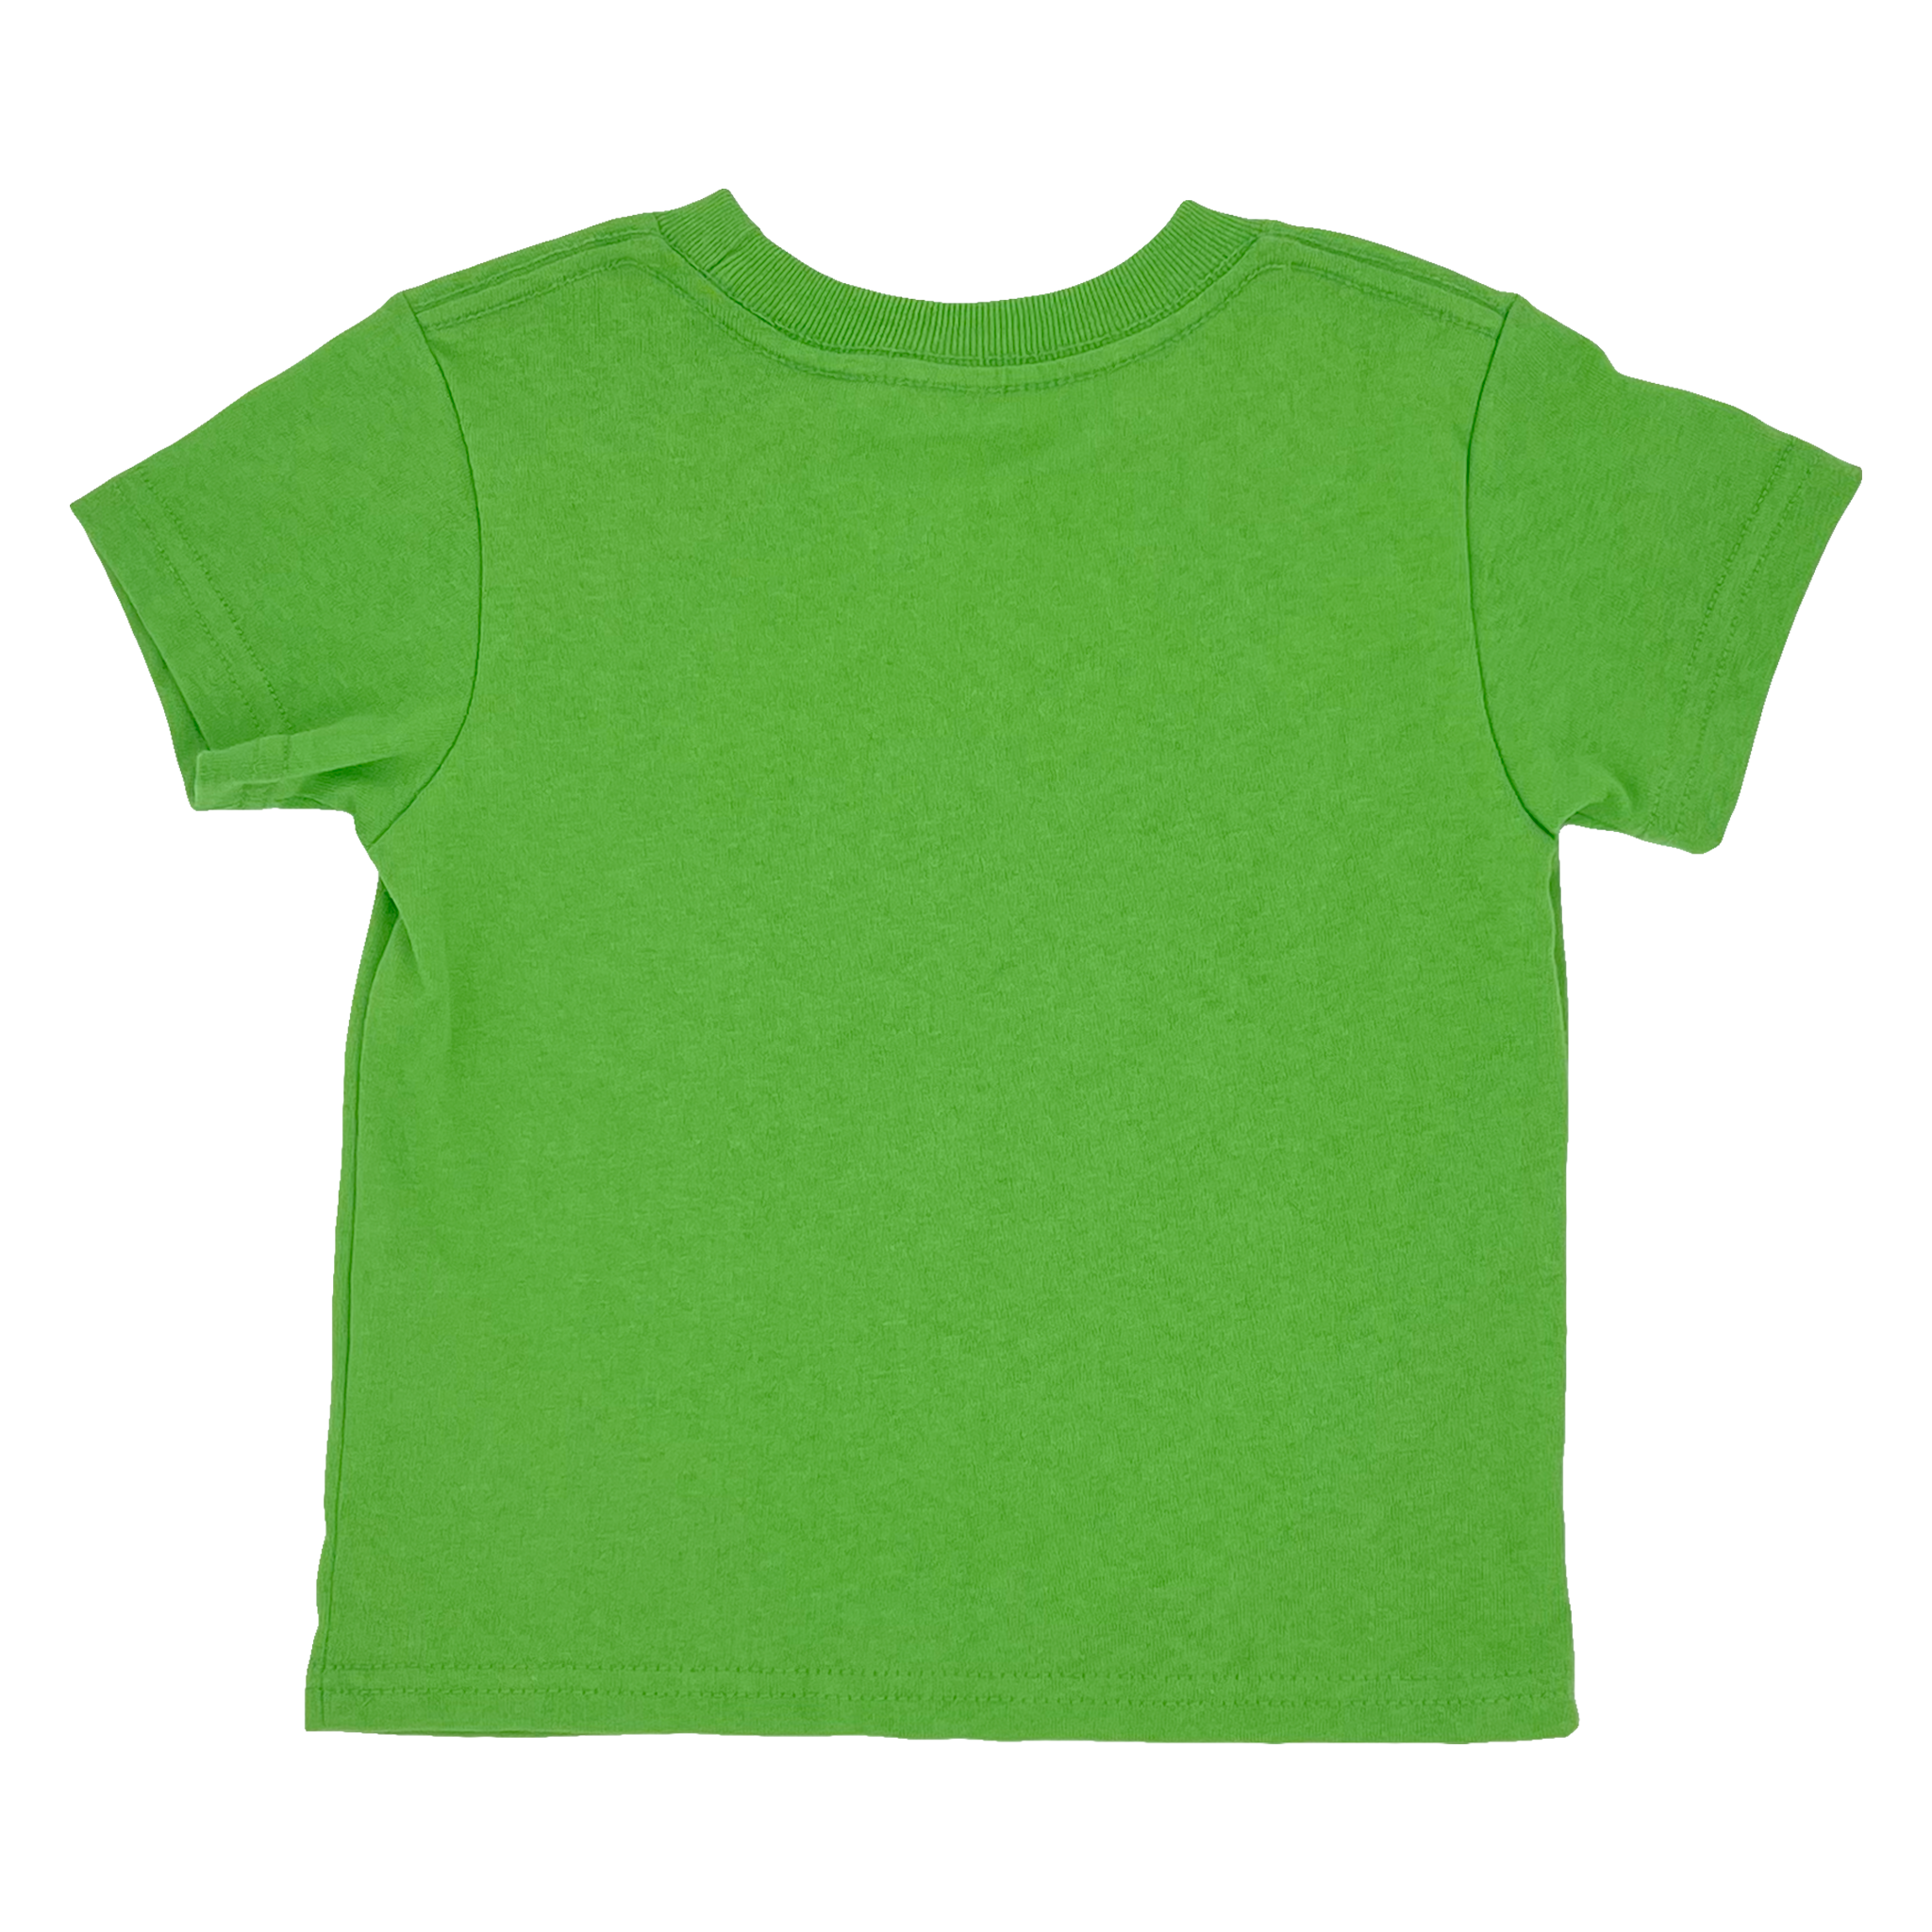 The back of an apple green toddler tee.